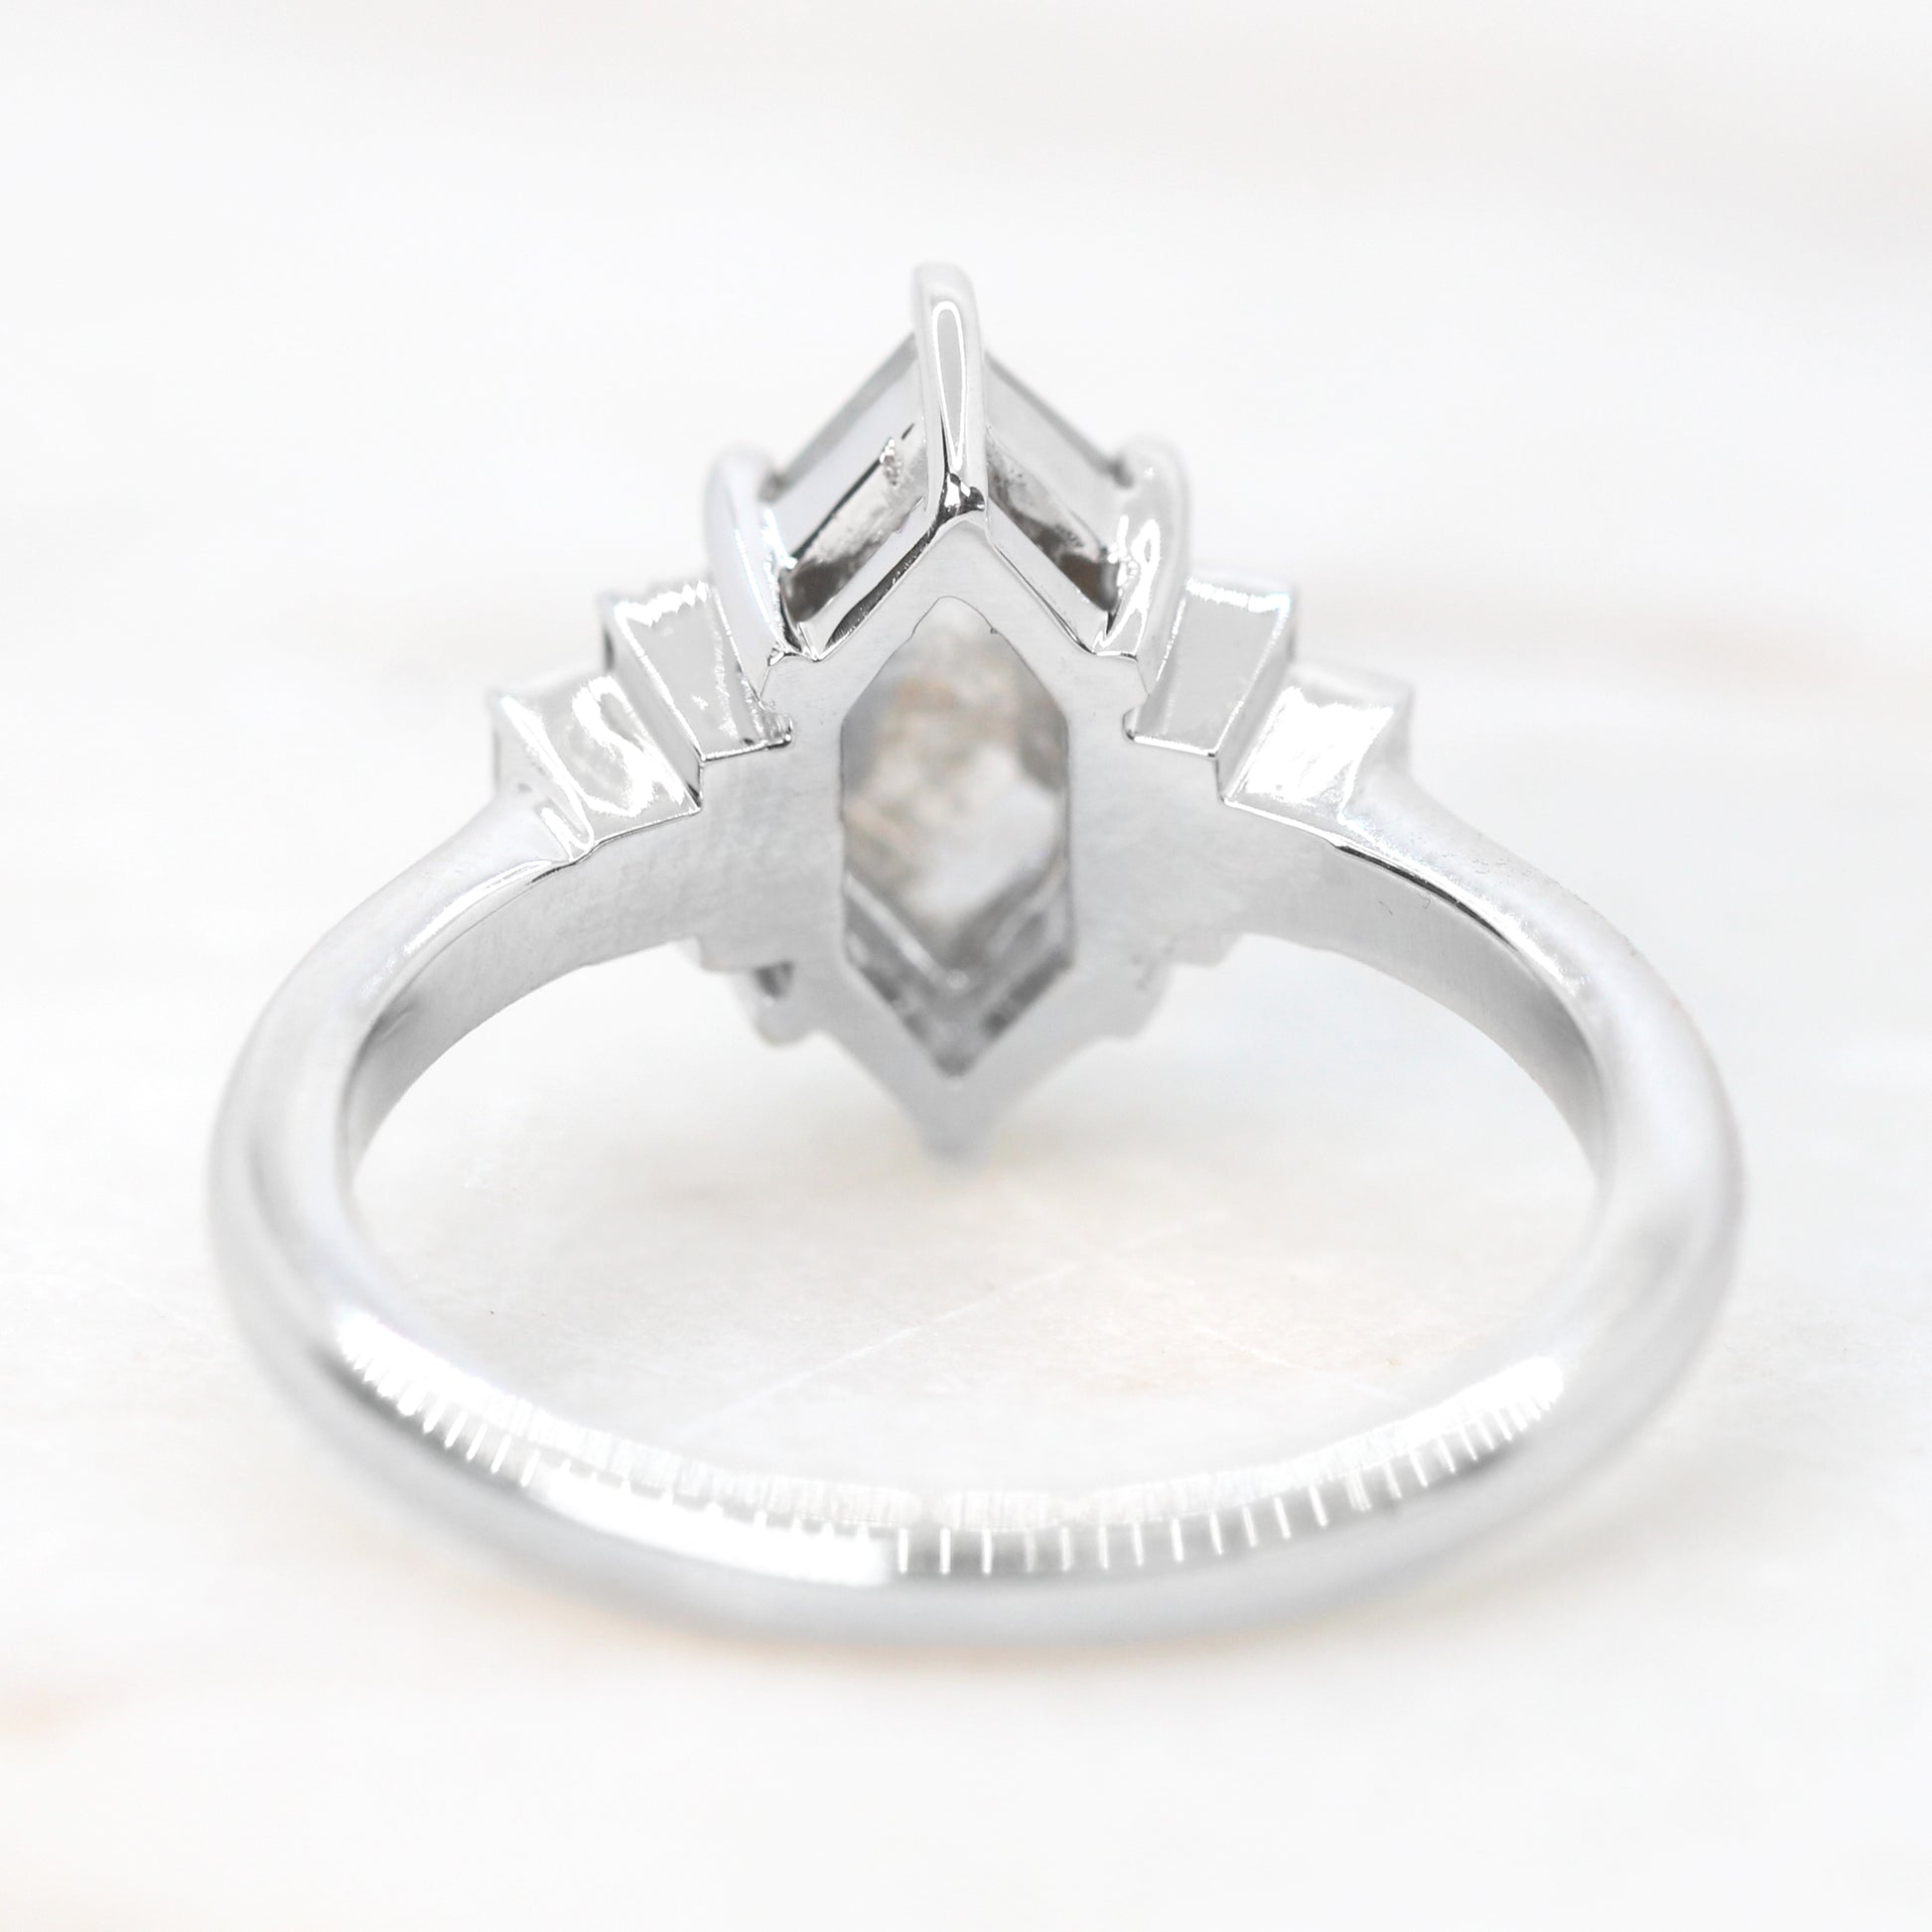 Zan Ring with a 1.57 Carat Light Gray Hexagon Celestial Diamond and White Accent Diamonds in 14k White Gold - Ready to Size and Ship - Midwinter Co. Alternative Bridal Rings and Modern Fine Jewelry